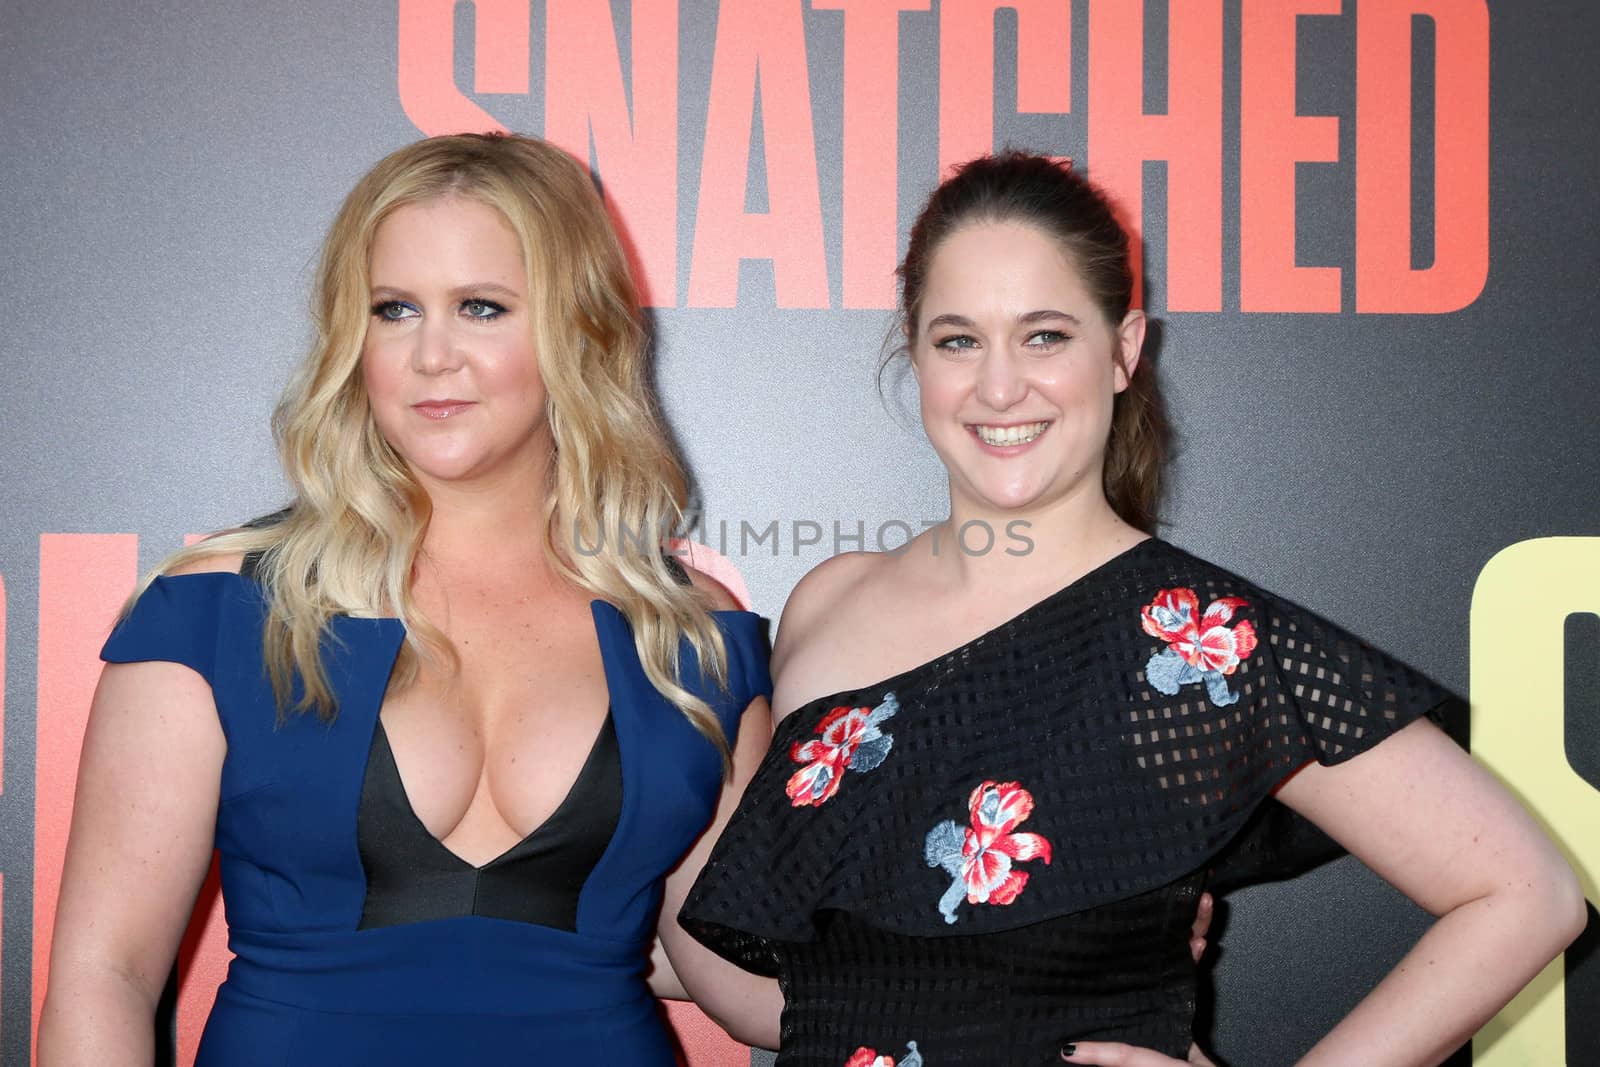 Amy Schumer, Kim Caramele at the "Snatched" World Premiere, Village Theater, Westwood, CA 05-10-17/ImageCollect by ImageCollect